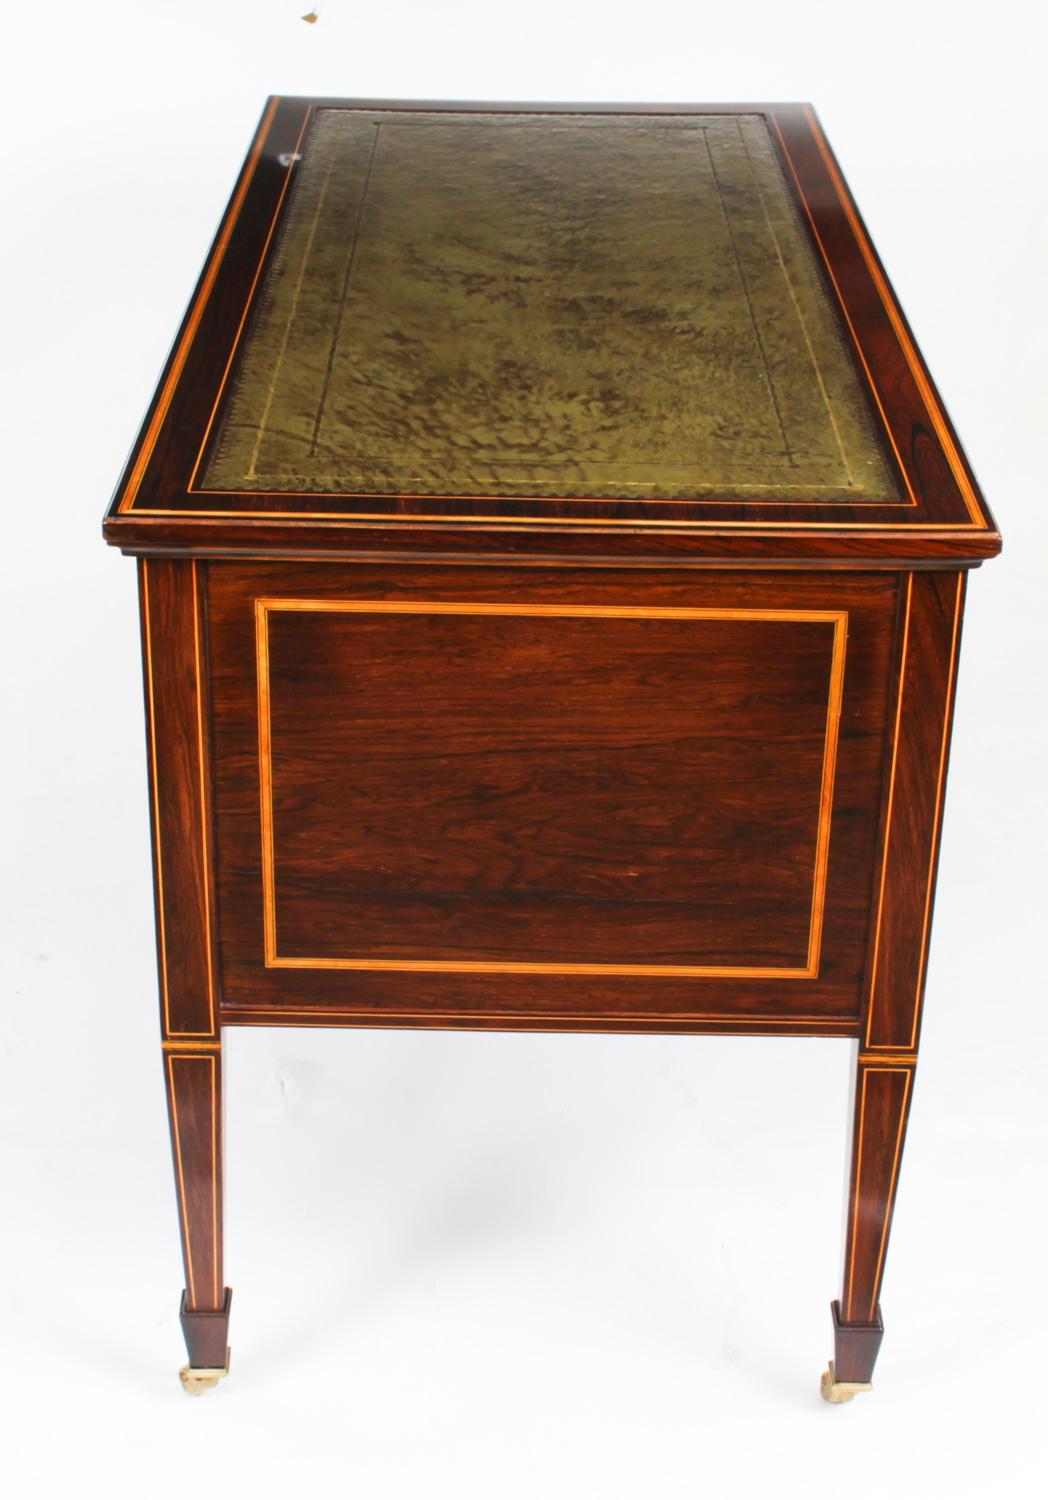 Antique Victorian Inlaid Writing Table Desk Manner of Edwards & Roberts 19th C 10